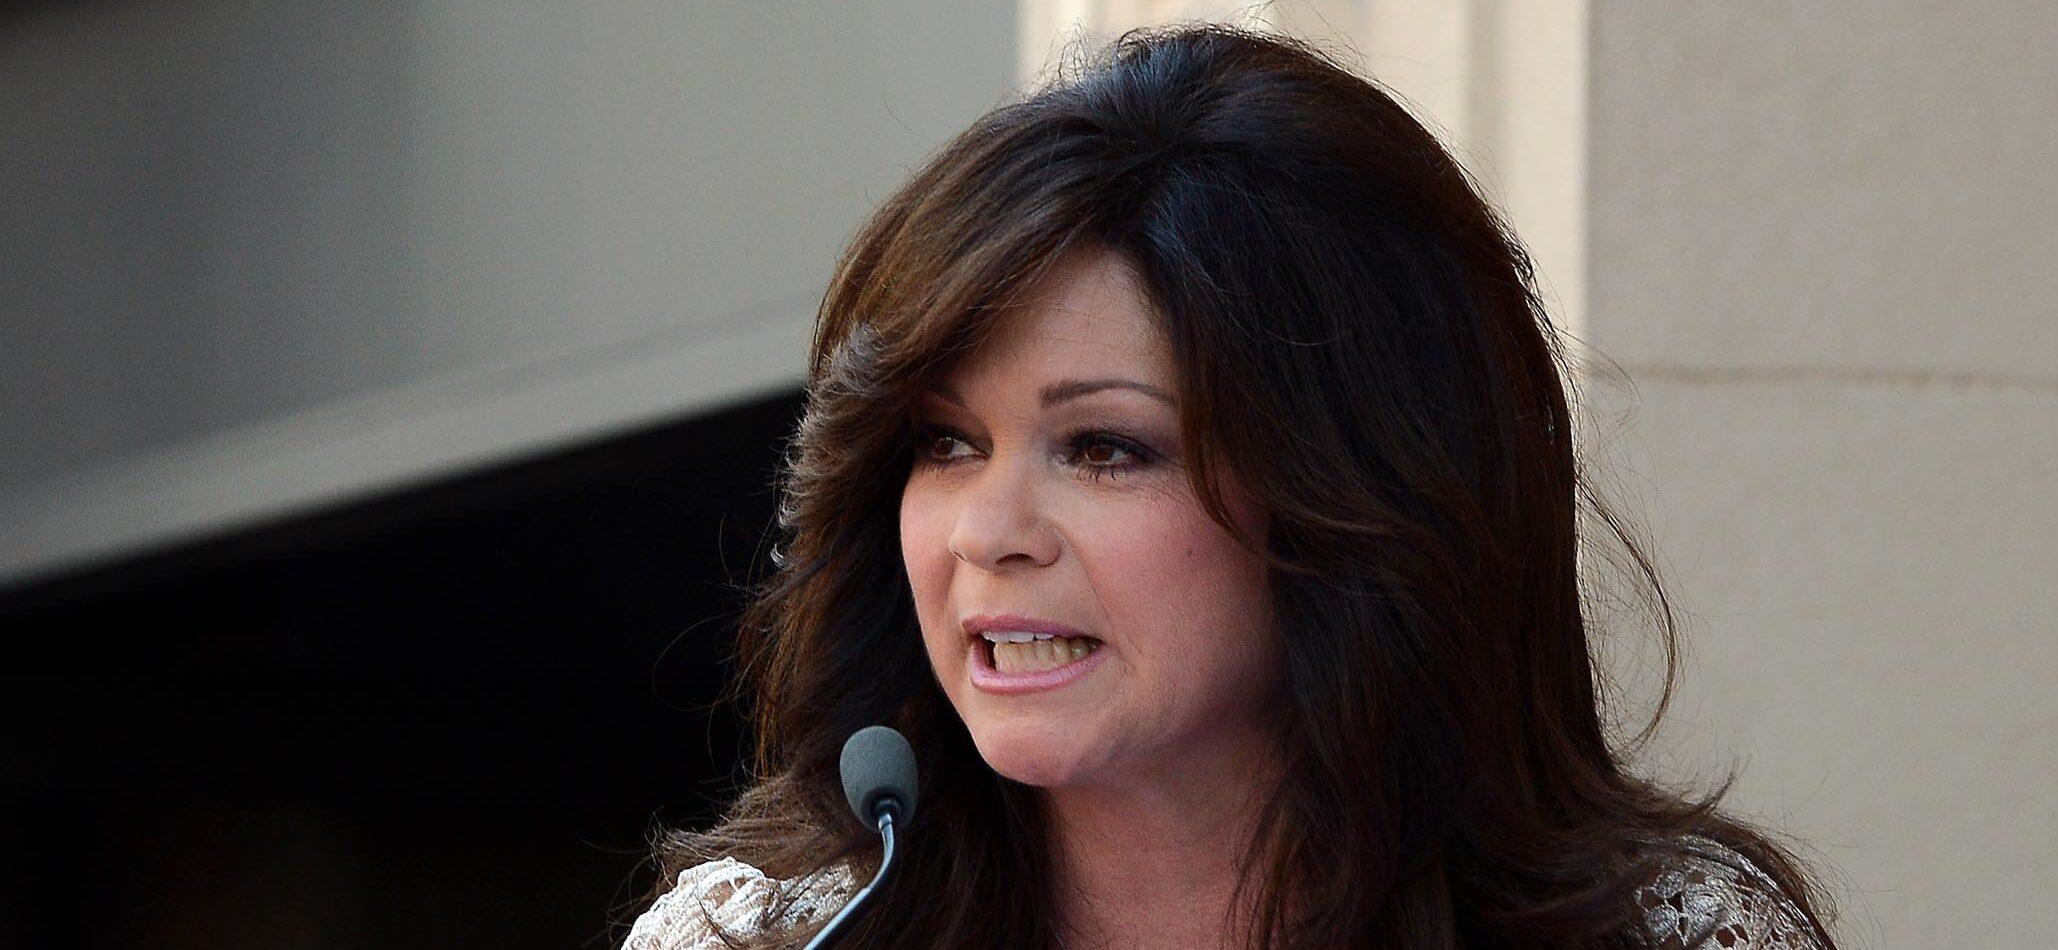 Valerie Bertinelli Gives Final Update On ‘Dry January:’ ‘So Many Feelings Coming Up’